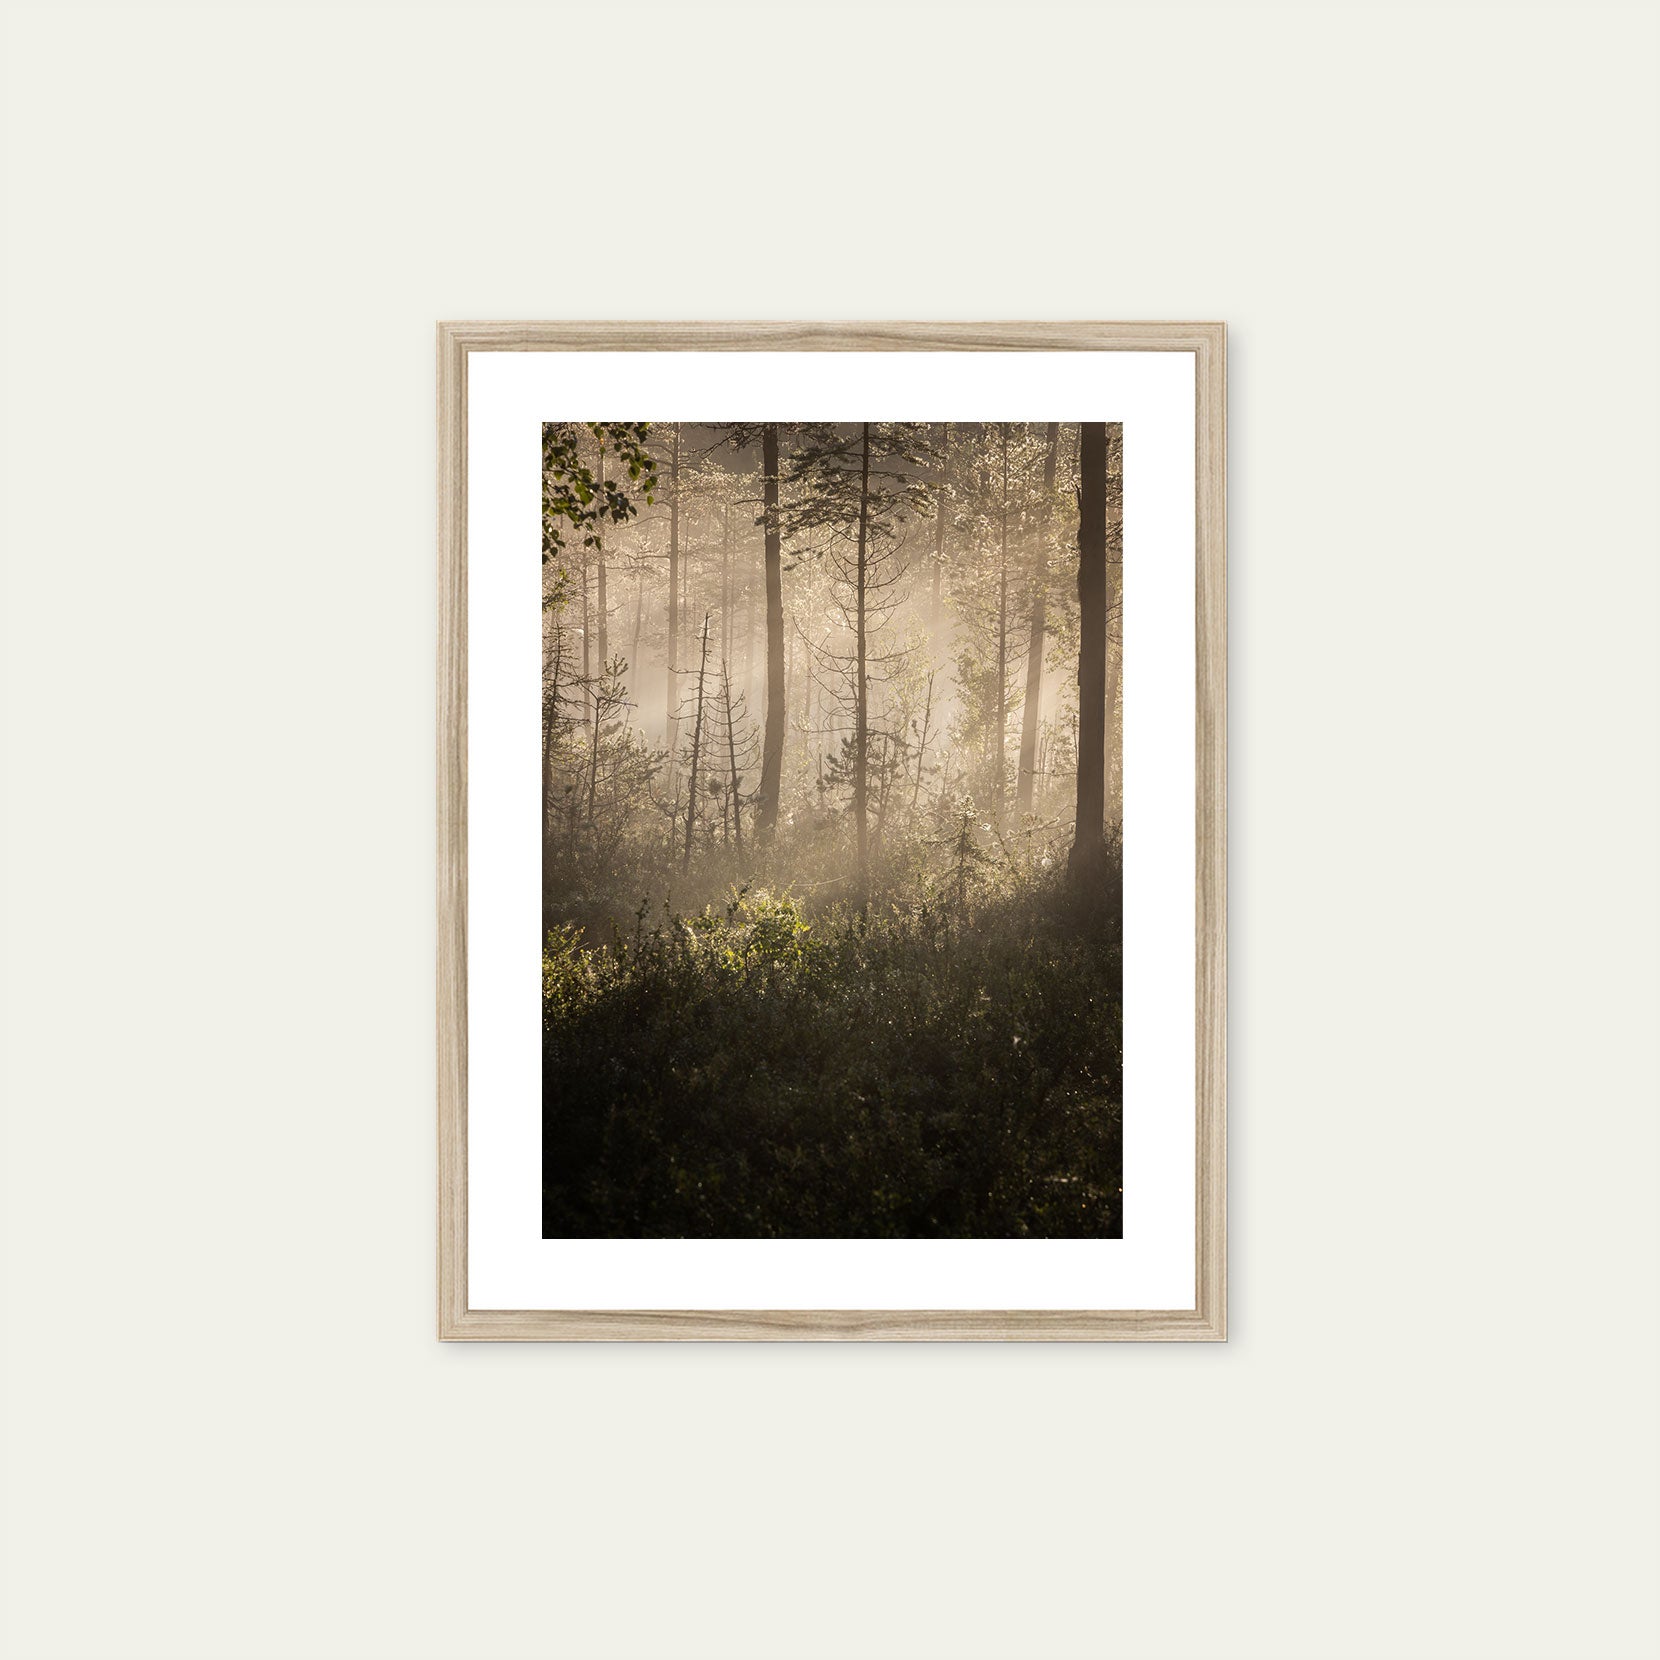 A wood framed print of a dawn in the forest